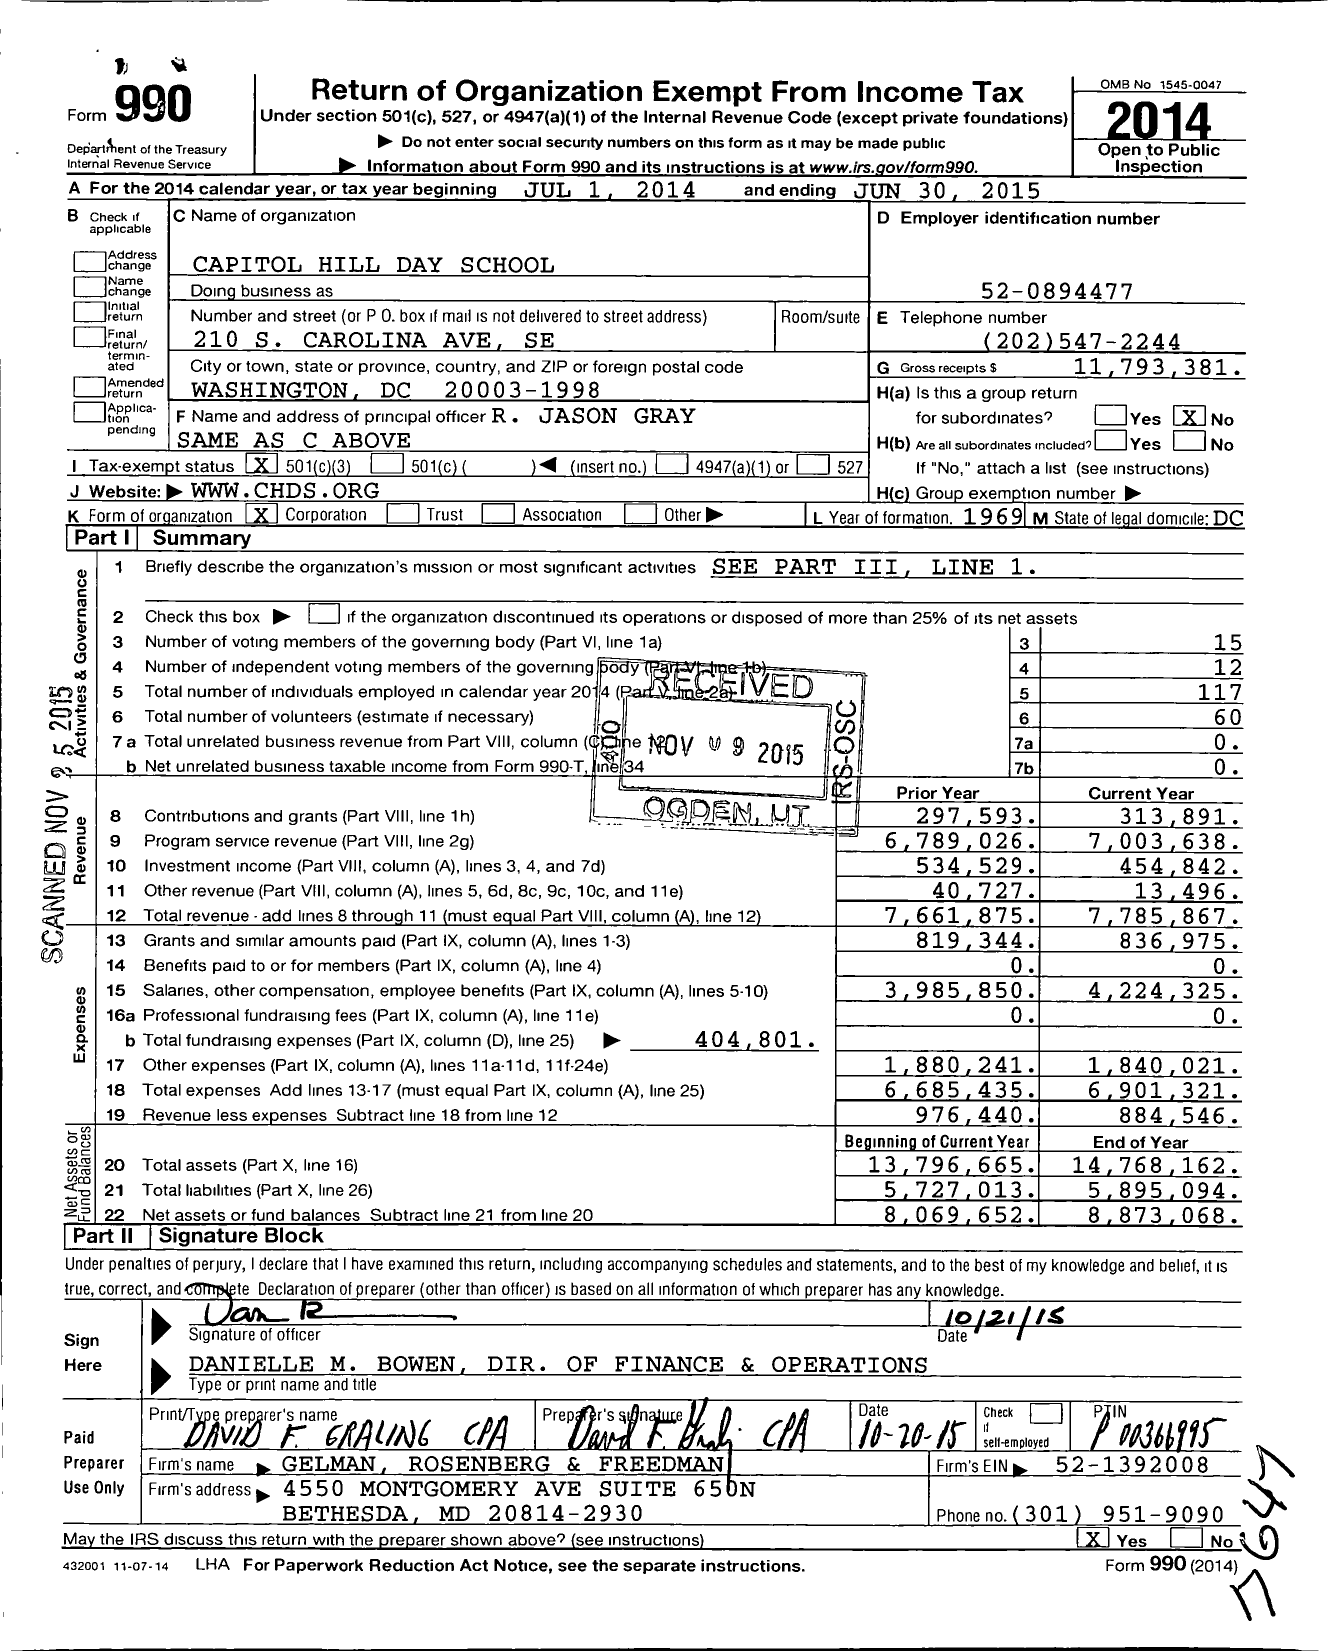 Image of first page of 2014 Form 990 for Capitol Hill Day School (CHDS)